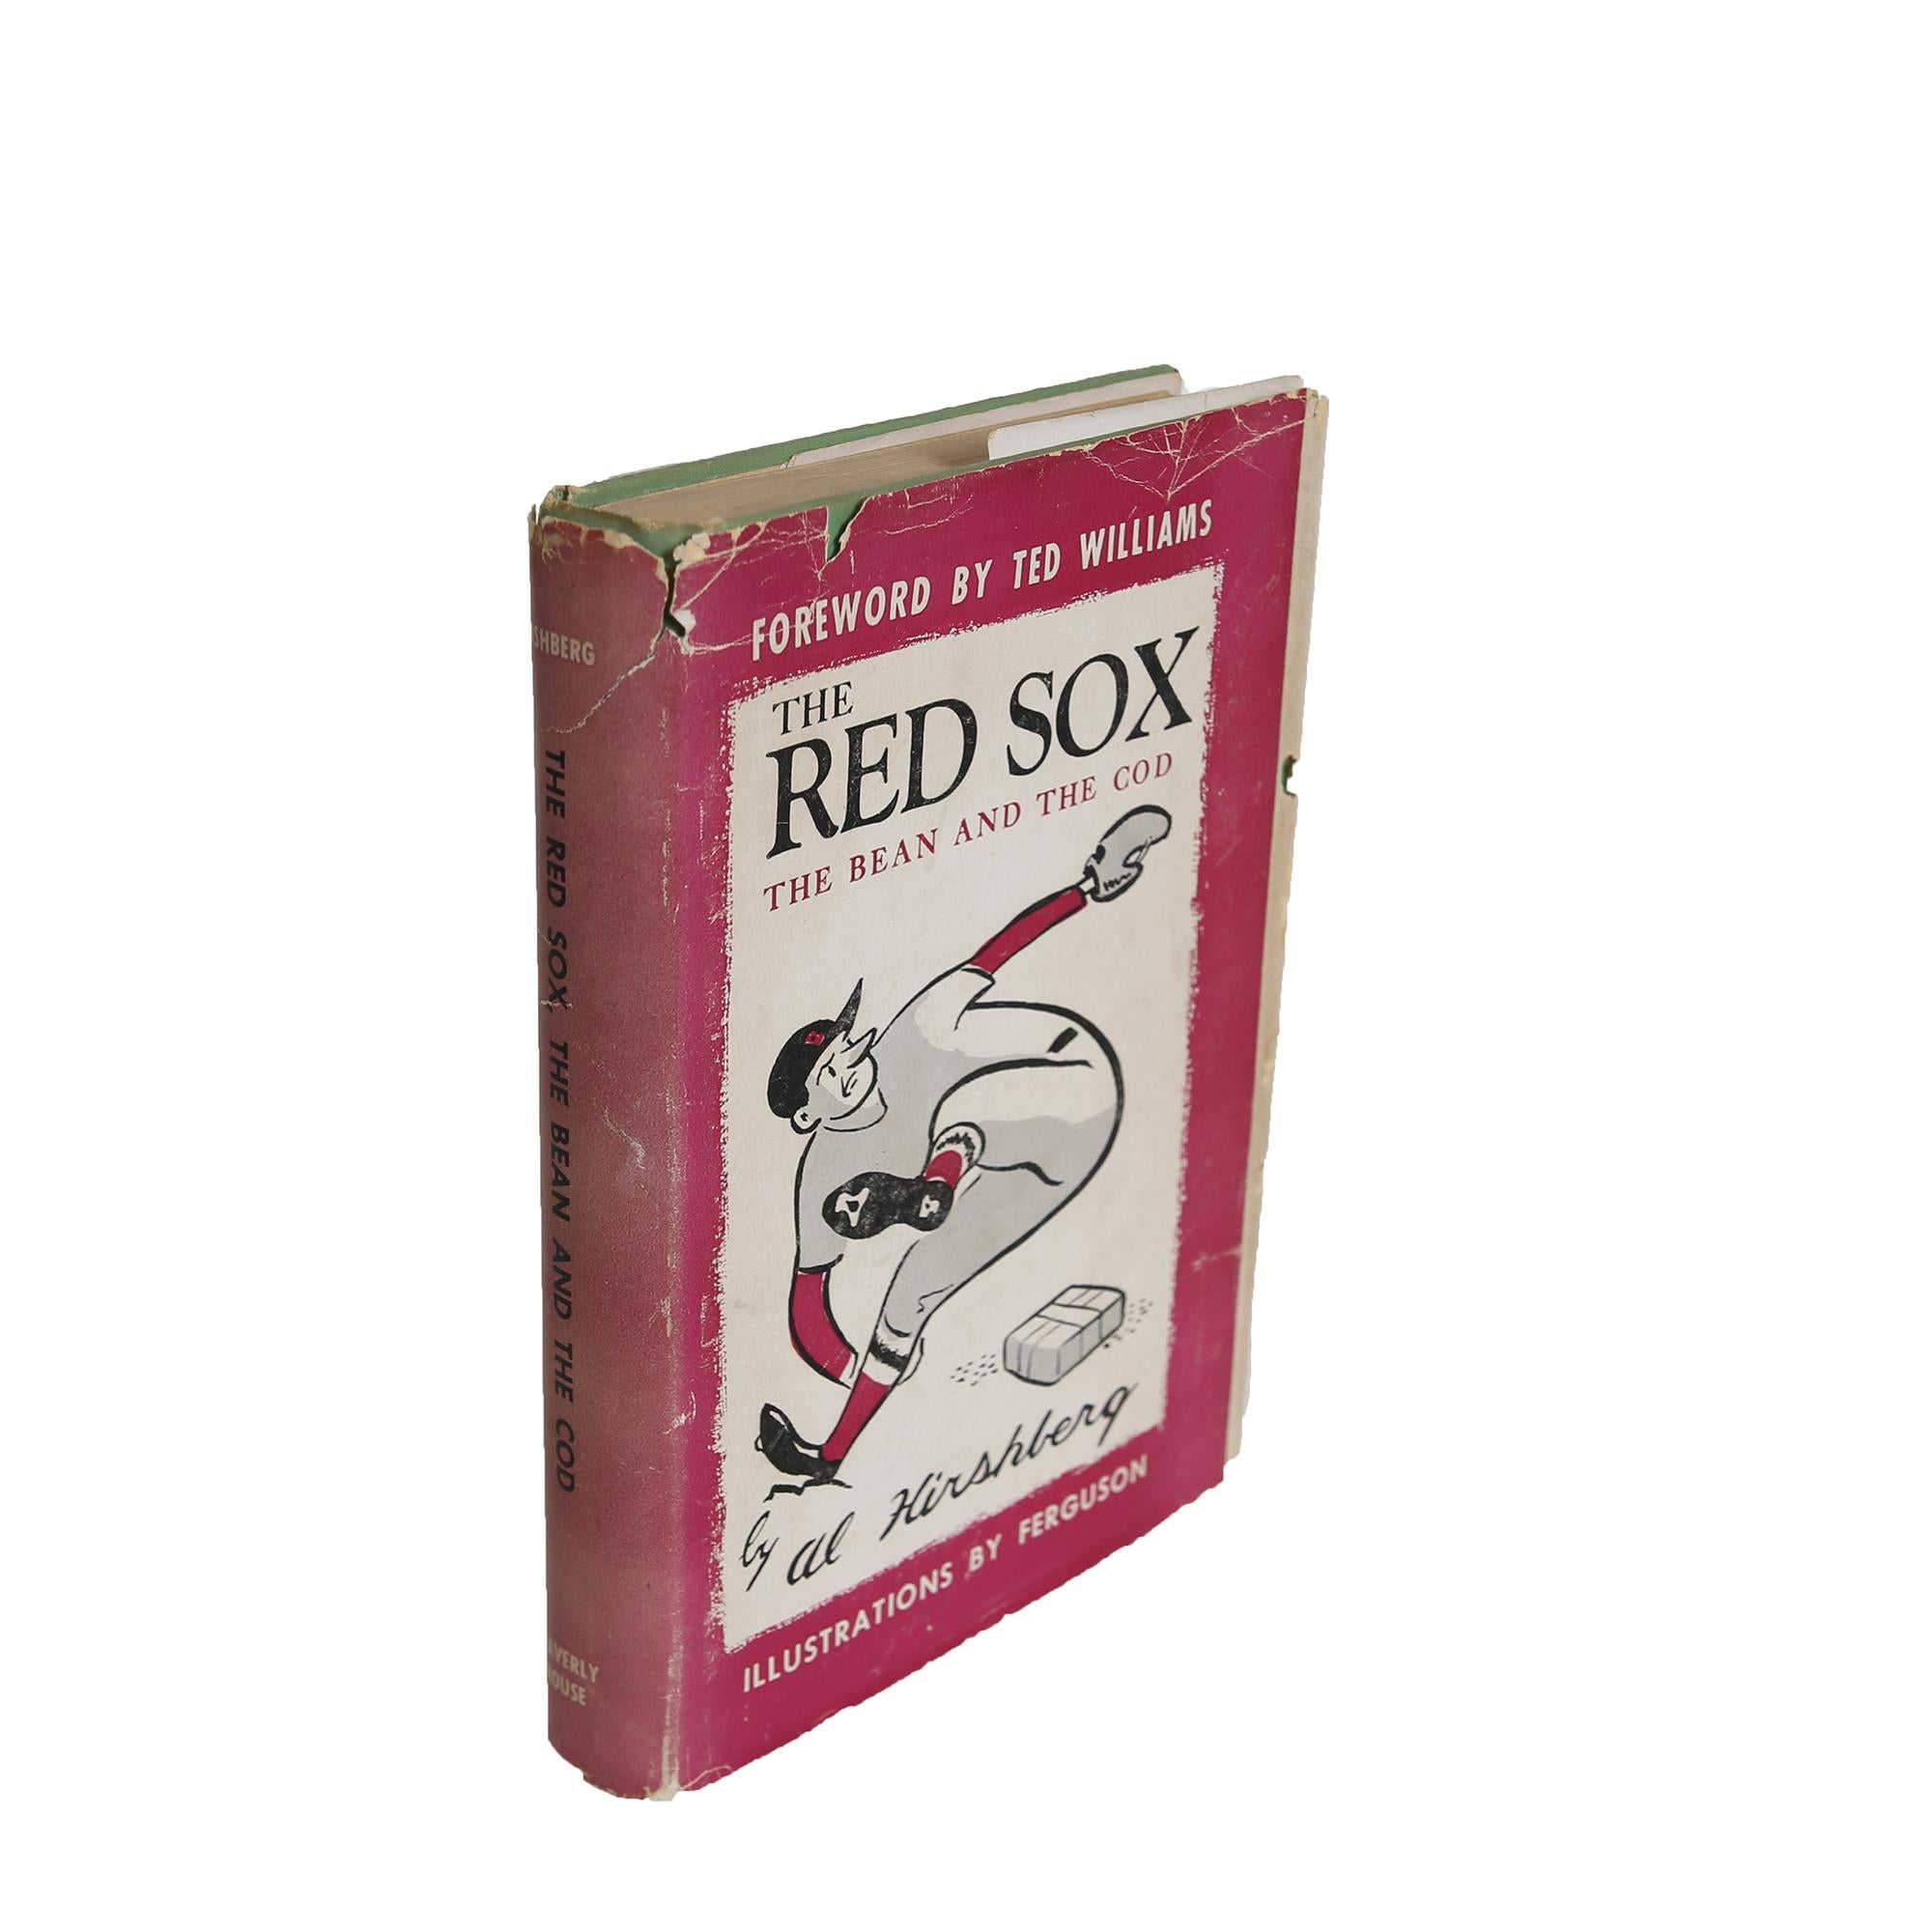 Signed by 1946 Red Sox Team The Red Sox The Bean and The Cod, with LOA 9